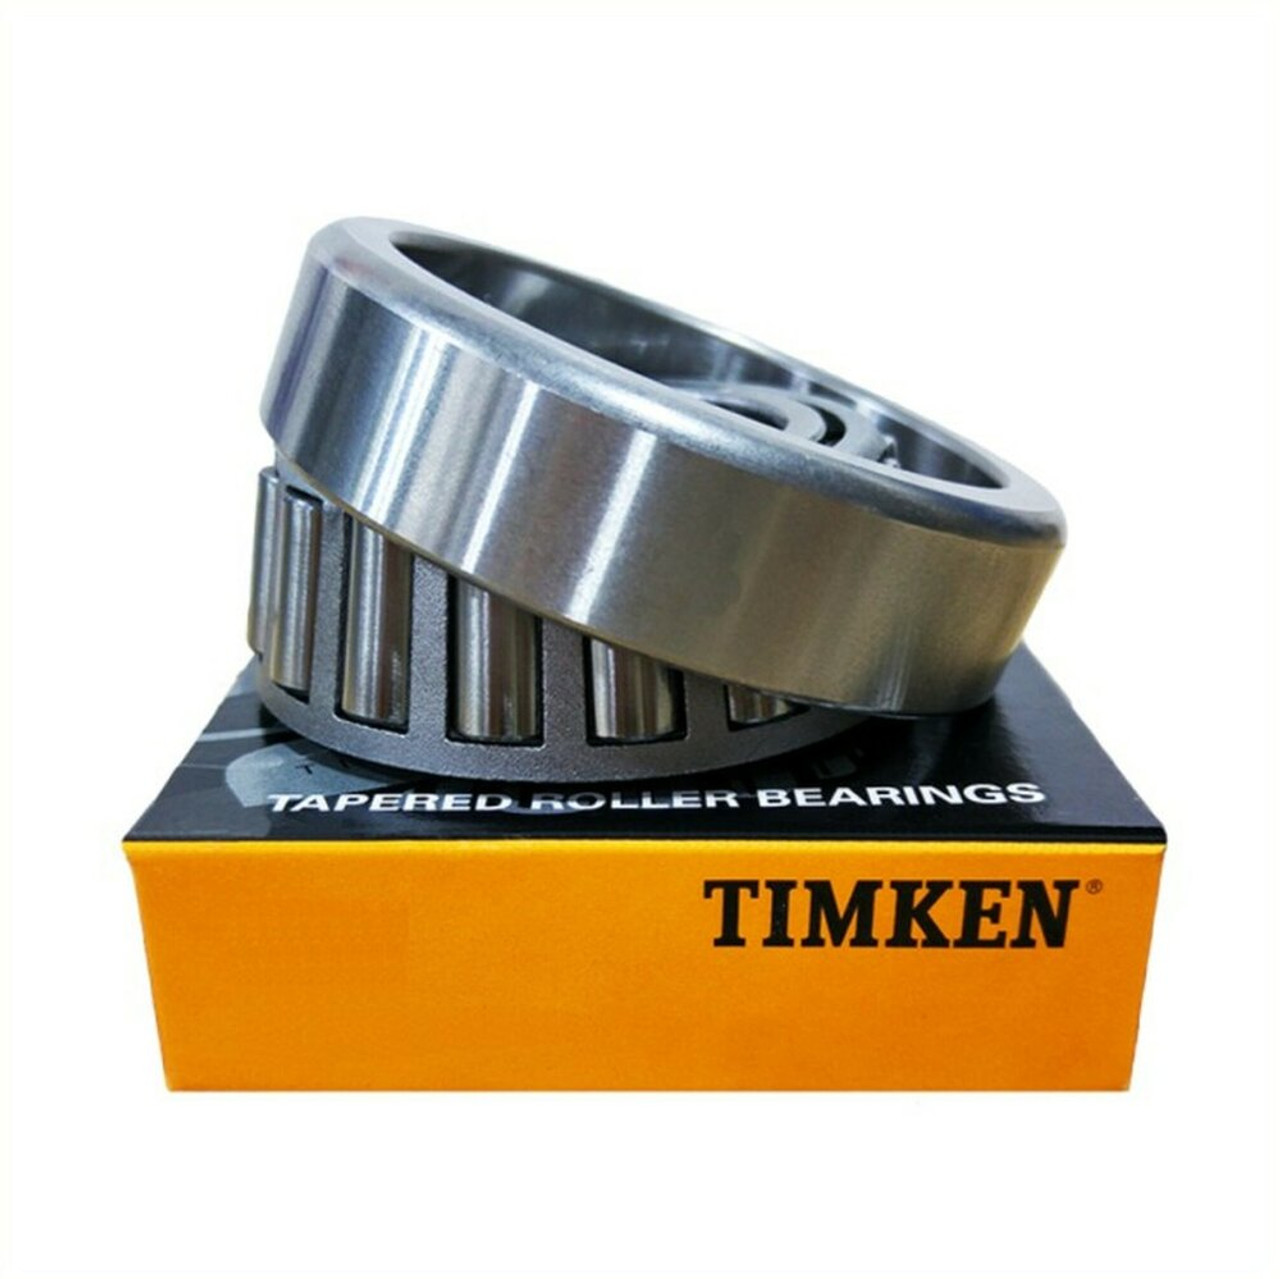 78214/78551 - Timken Taper Roller Bearing - 2.125x5.513x1.4375inches